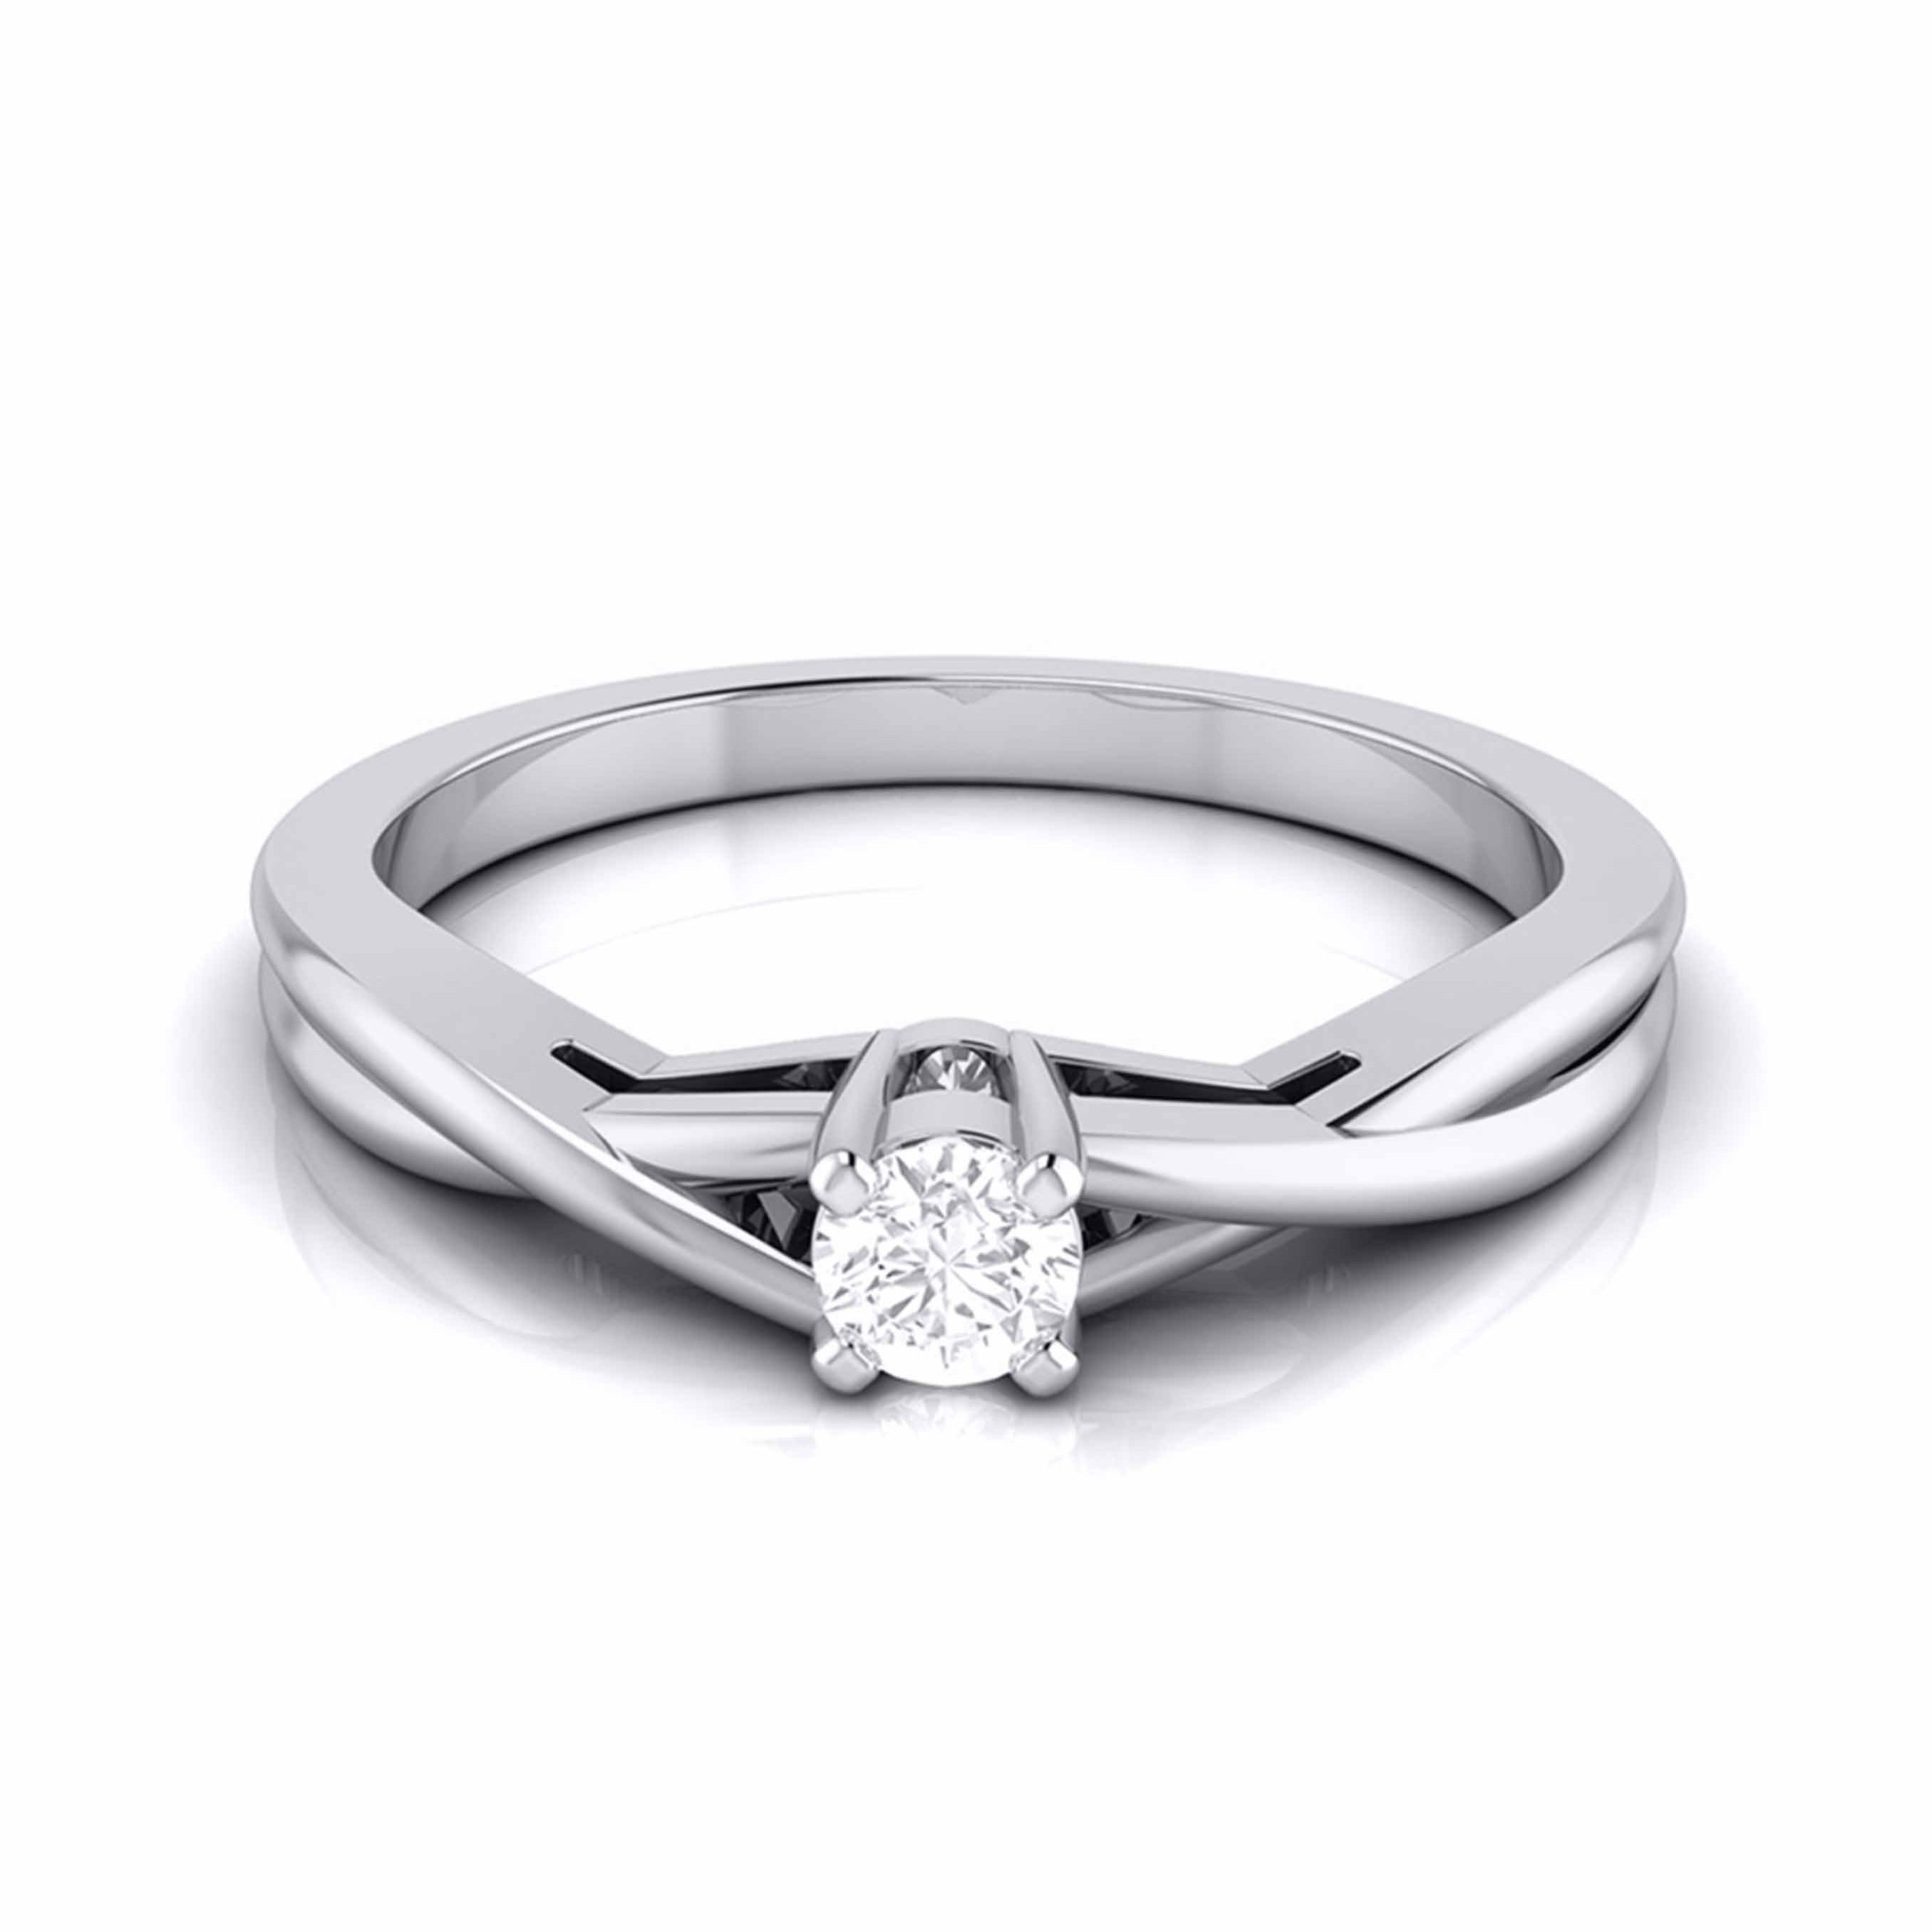 20-Pointer Platinum Solitaire Ring - Shank with a Twist JL PT G 115-A   Jewelove.US